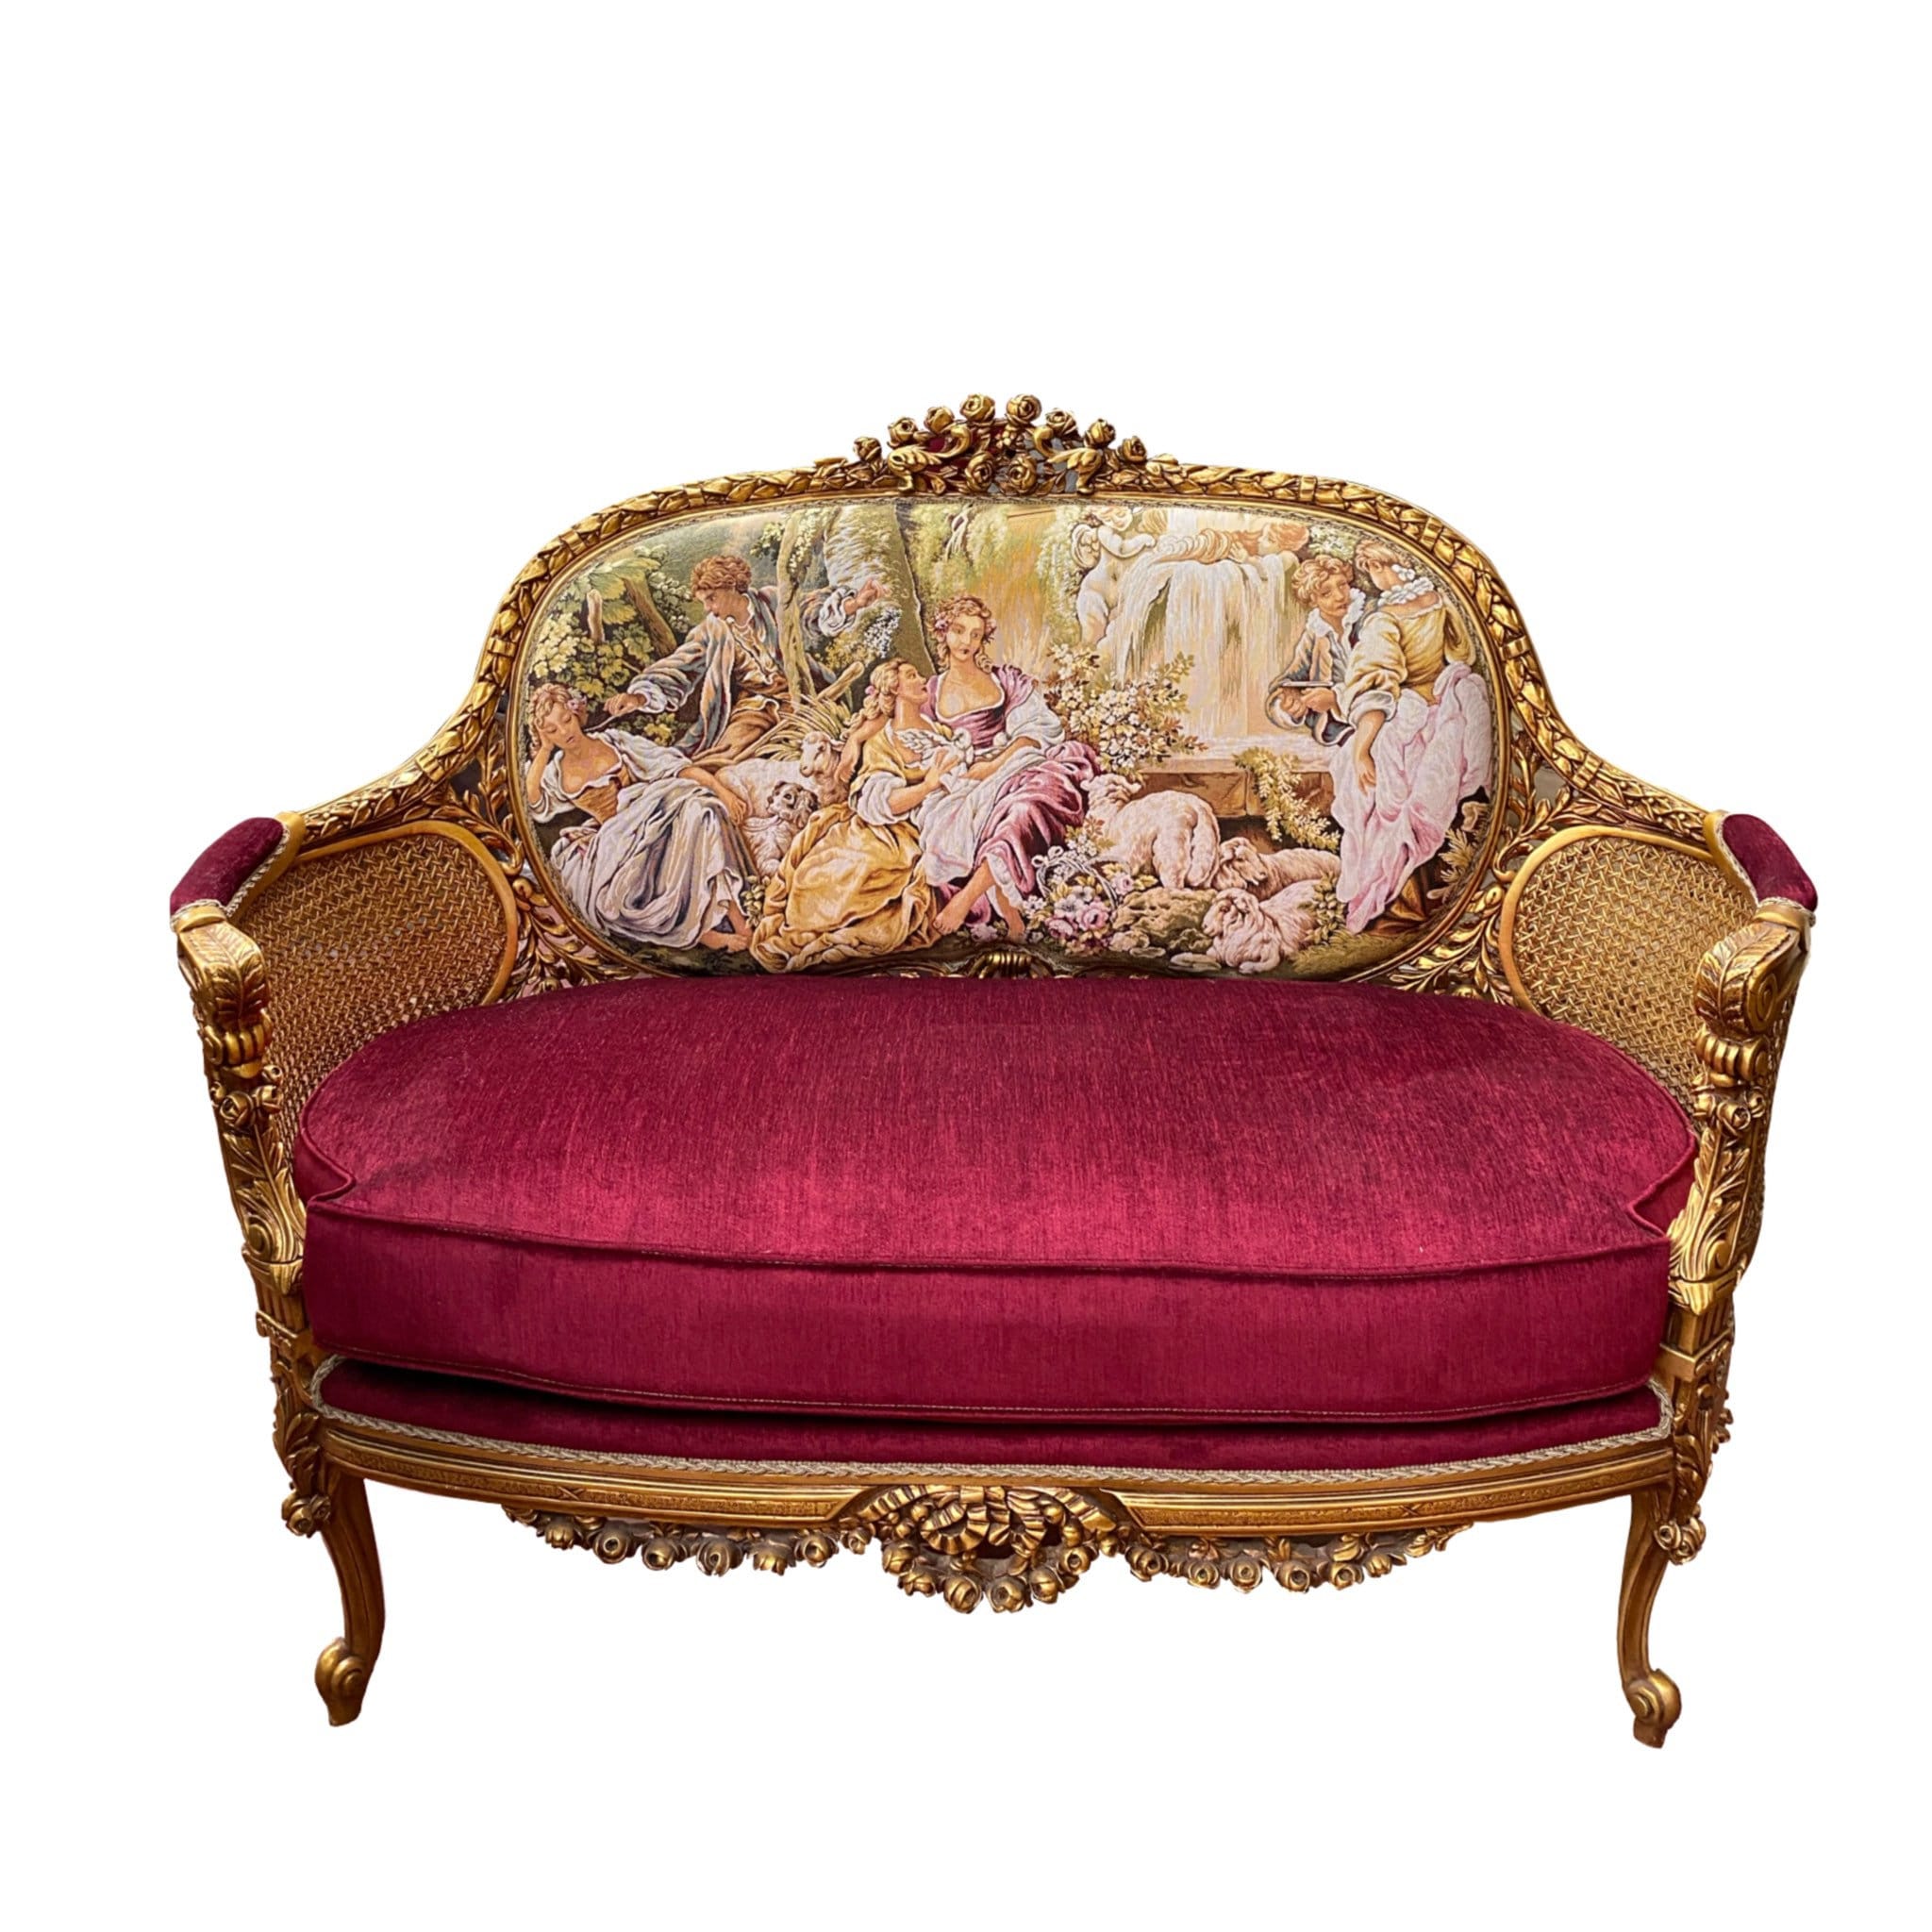 HIGH END Louis XV French Provincial Style Chenille Upholstered